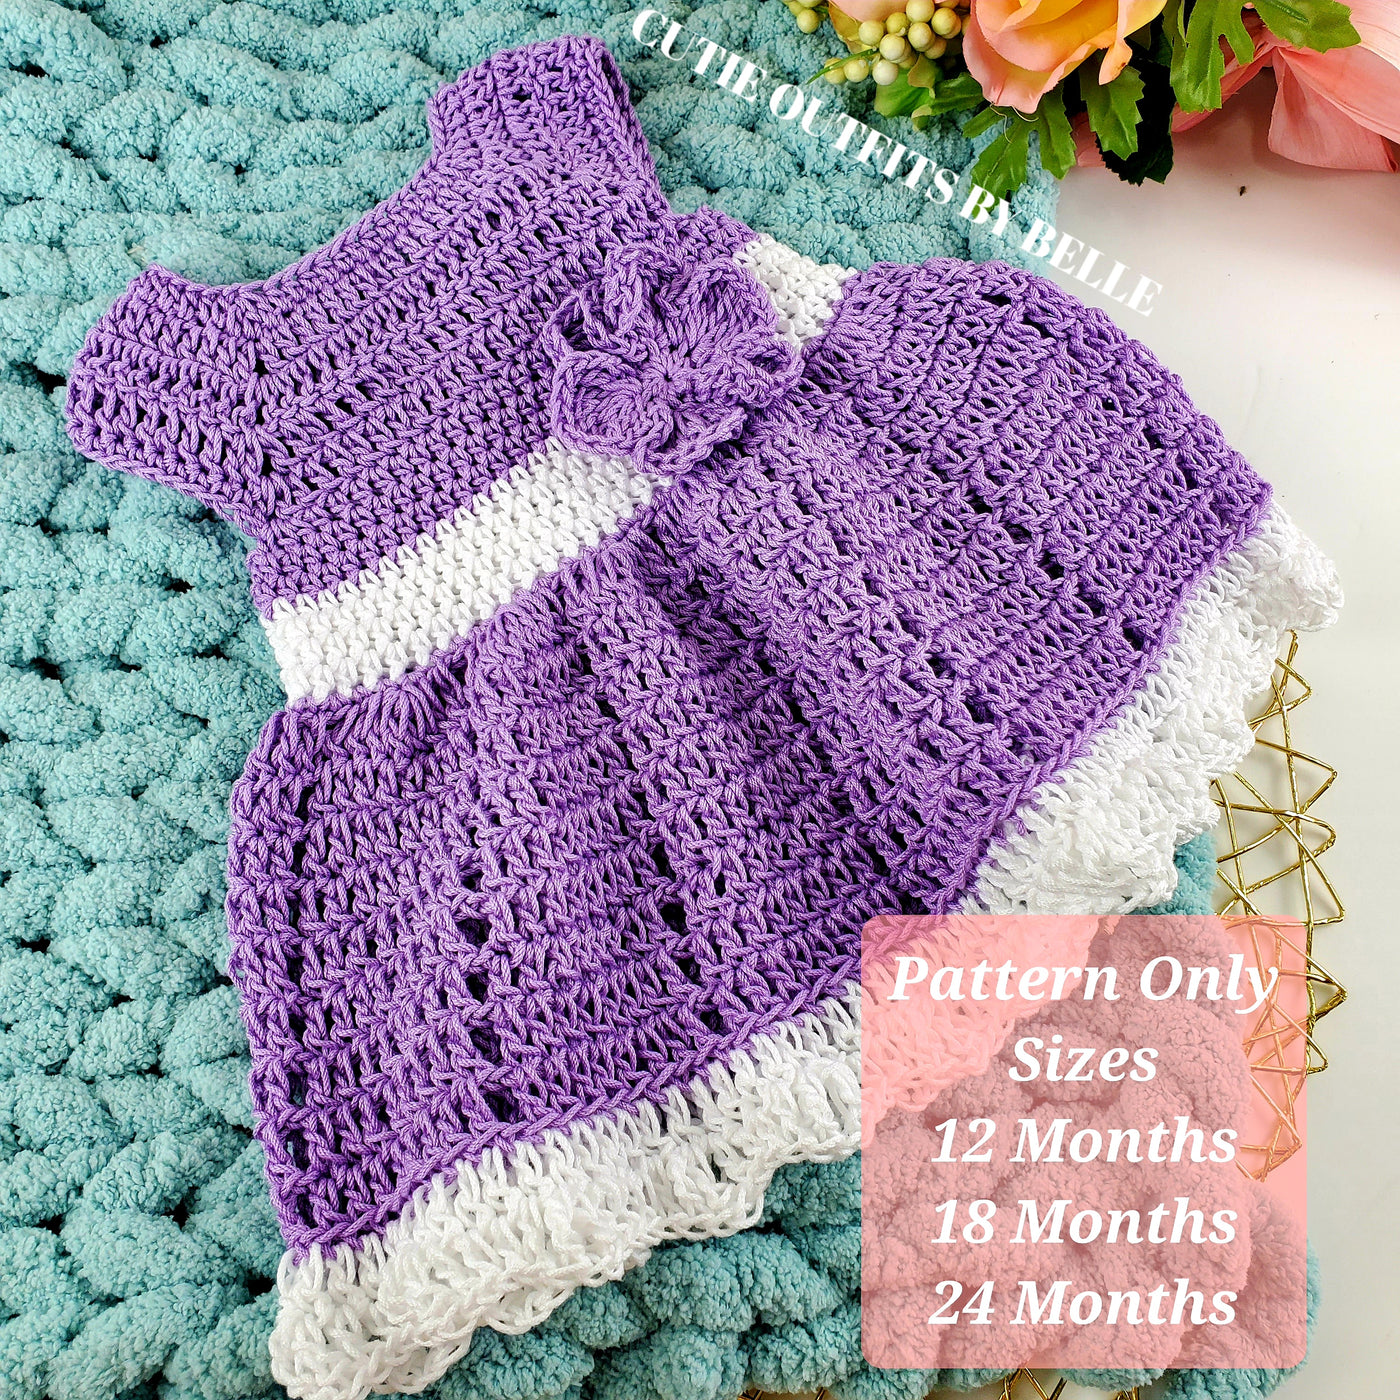 PATTERN 12 Months 18 Months 24 Months Crochet Baby Dress Pattern Field Of Violets 3 Sizes, PDF Instant Download